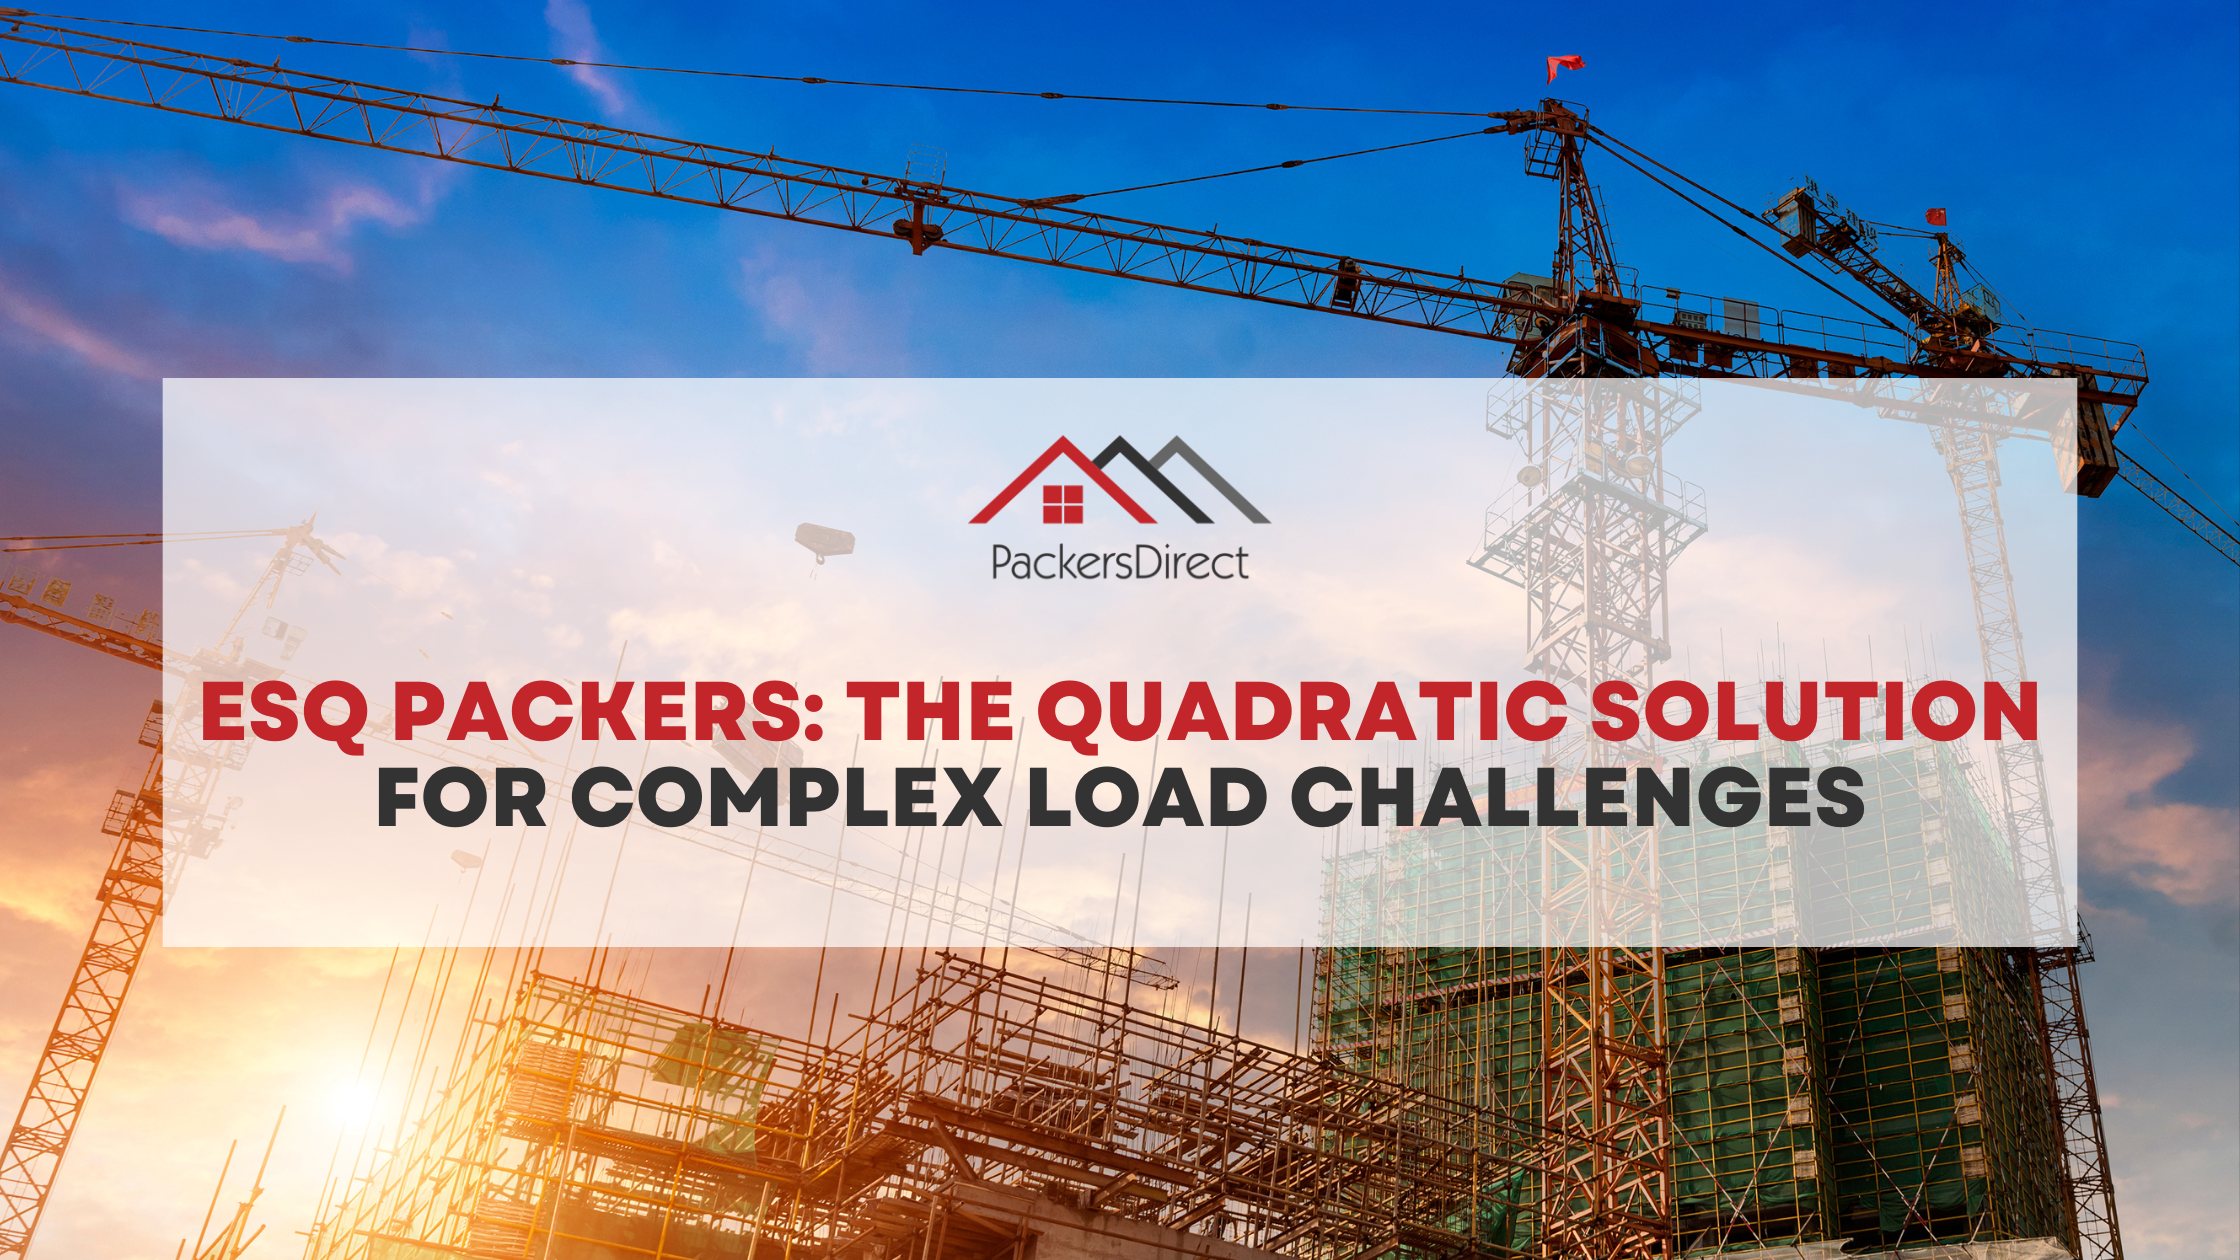 ESQ Packers: The Quadratic Solution for Complex Load Challenges